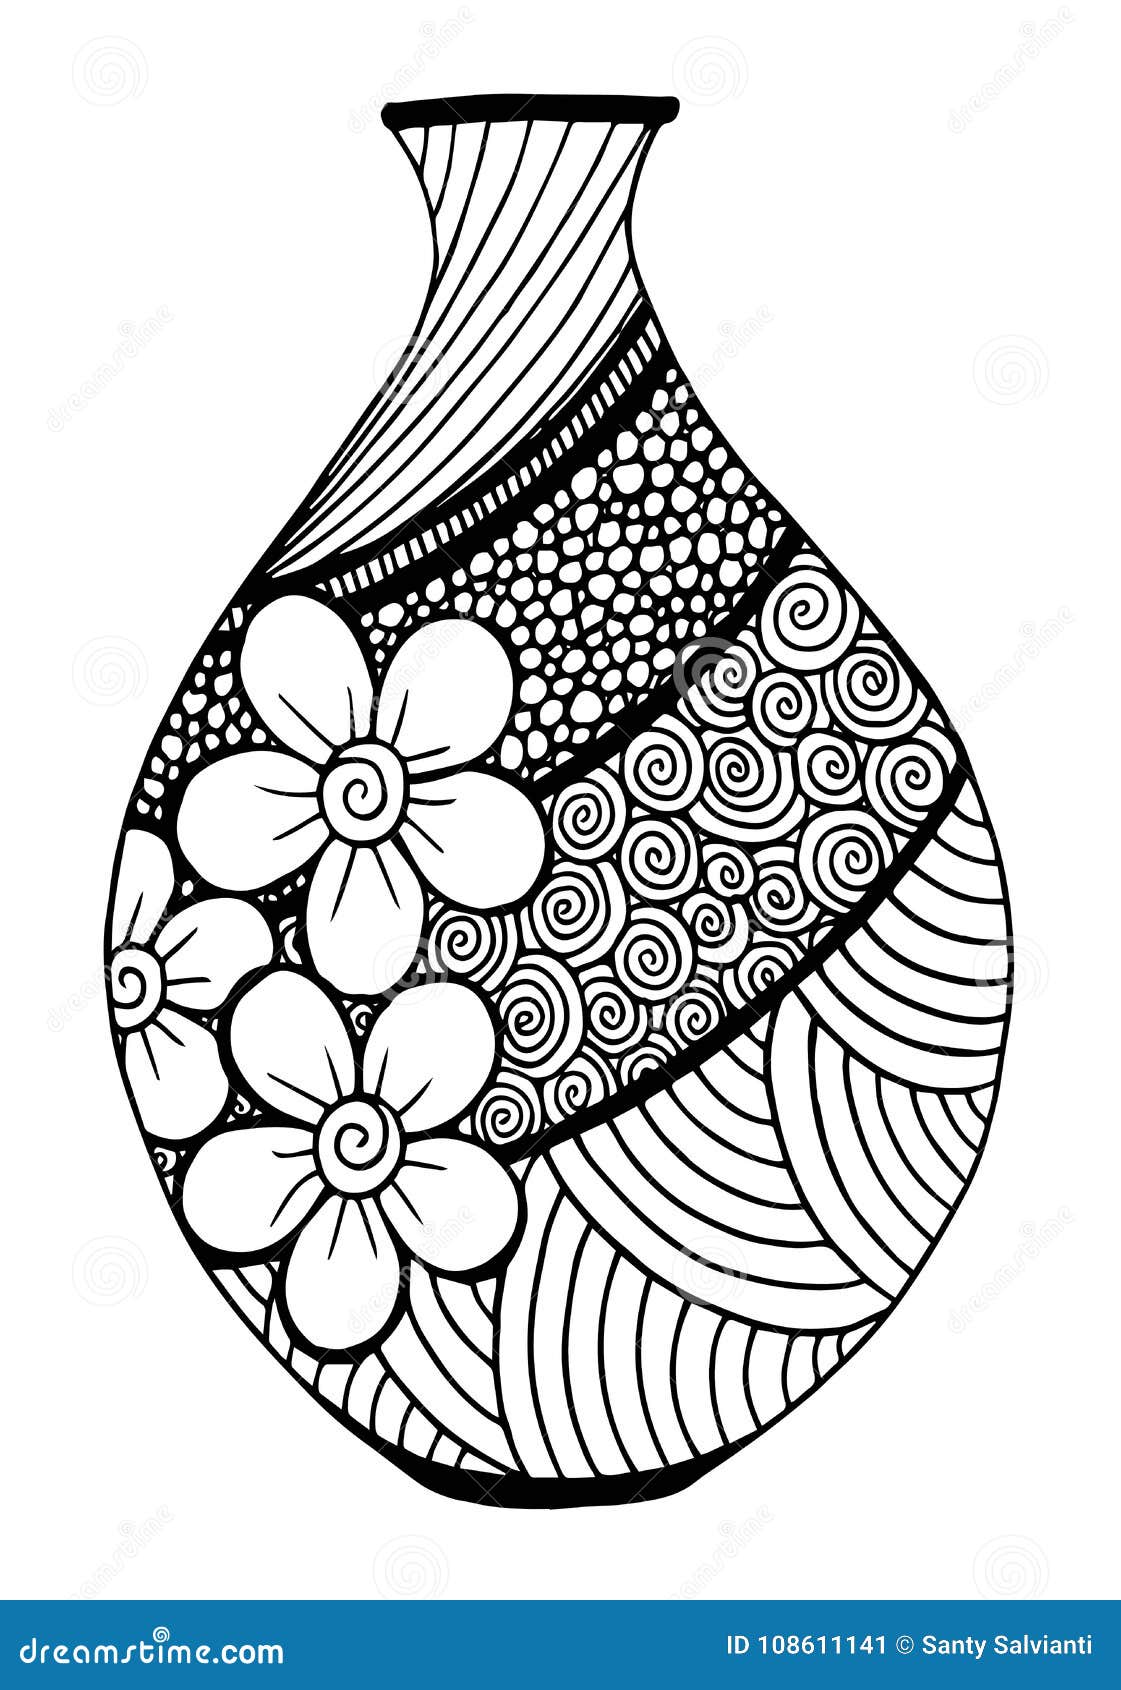 Vase with Flower Drawing Print fine art print by artist Holly Francesca  Berry.